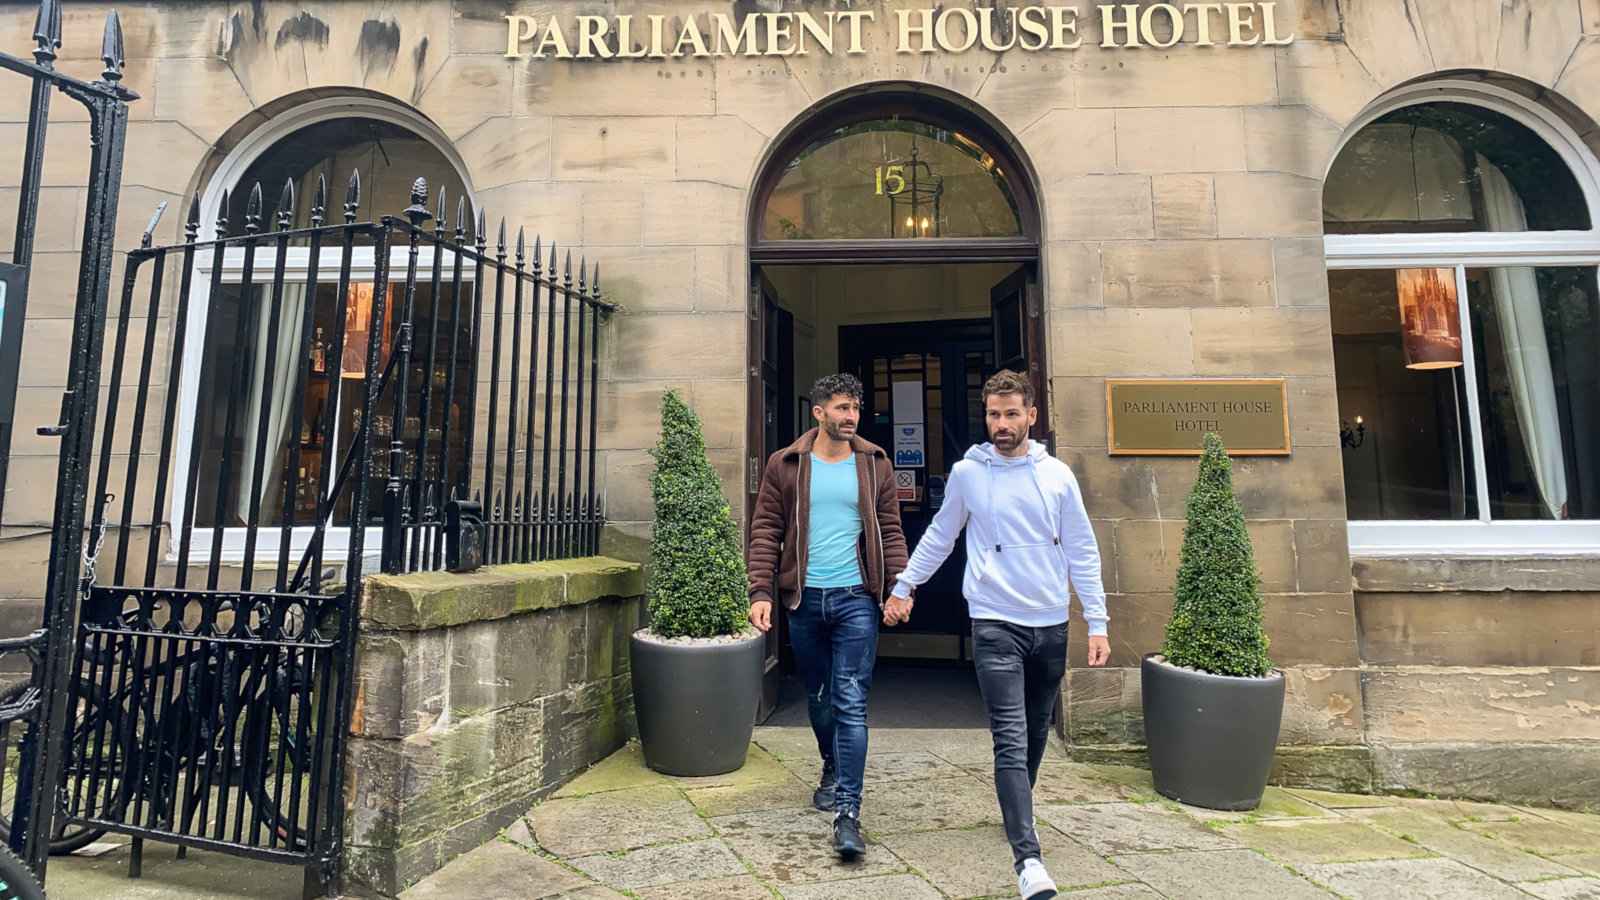 Parliament House Hotel is our pick of gay hotels in Edinburgh